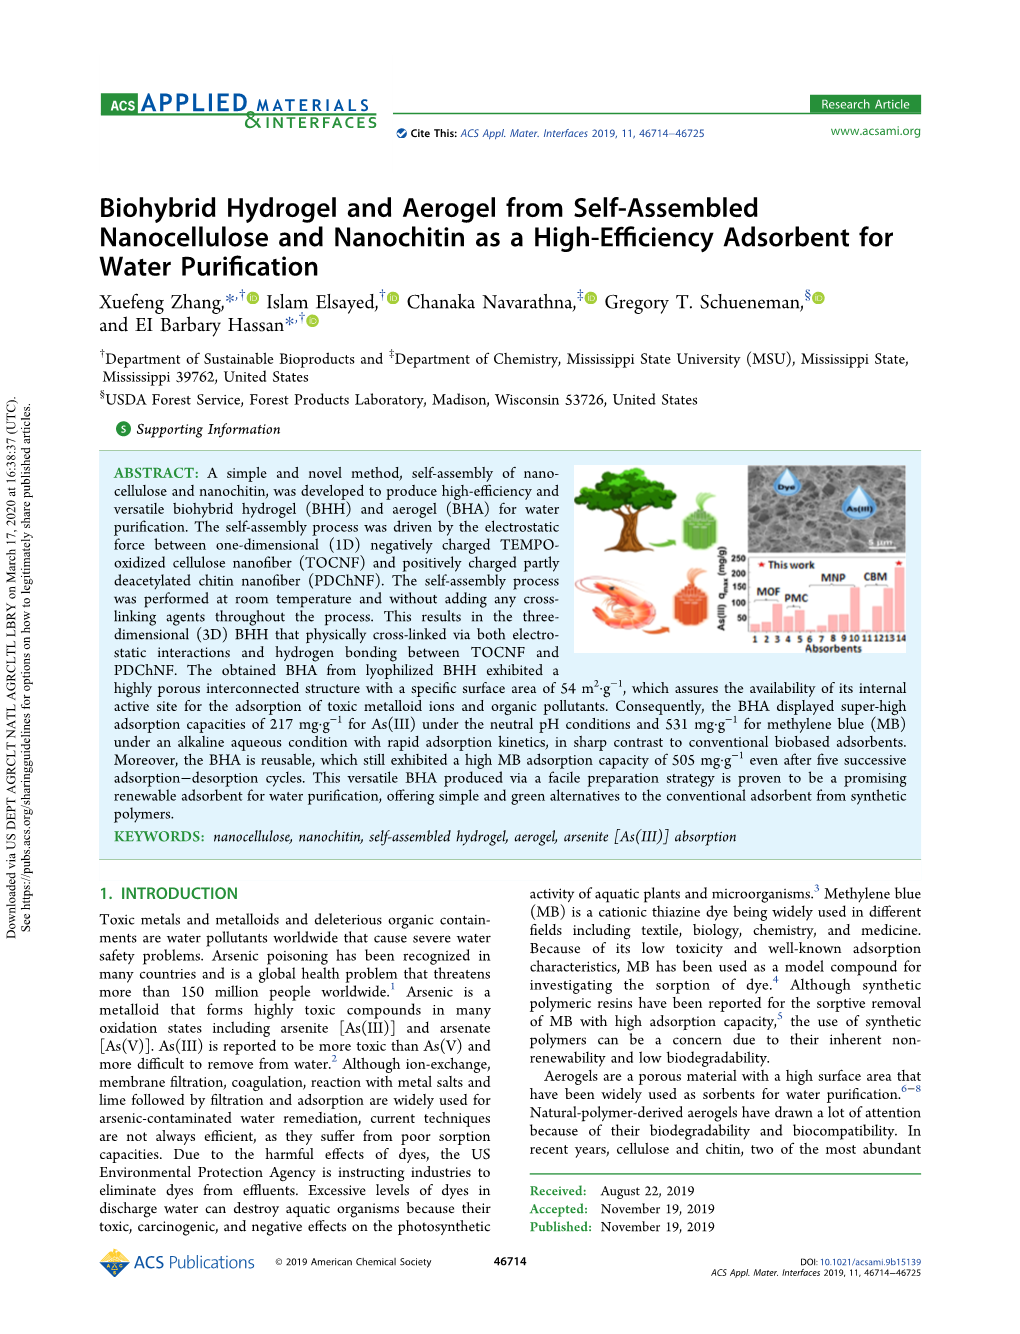 Biohybrid Hydrogel and Aerogel from Self-Assembled Nanocellulose And